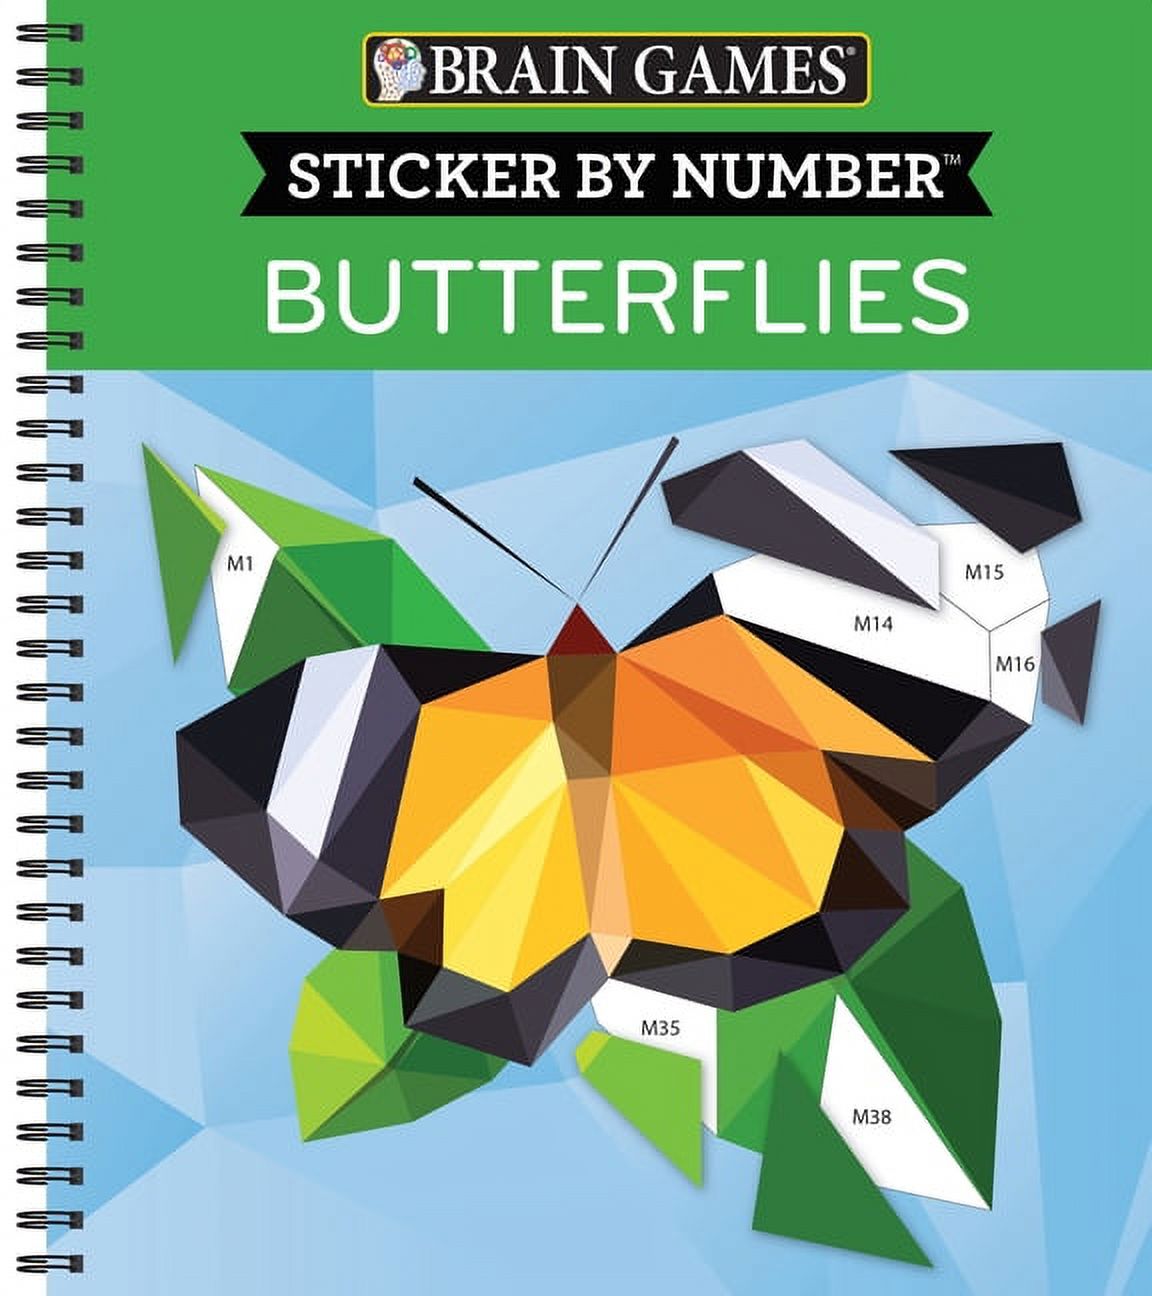 Brain Games - Sticker by Number: Butterflies (28 Images to Sticker) [Book]